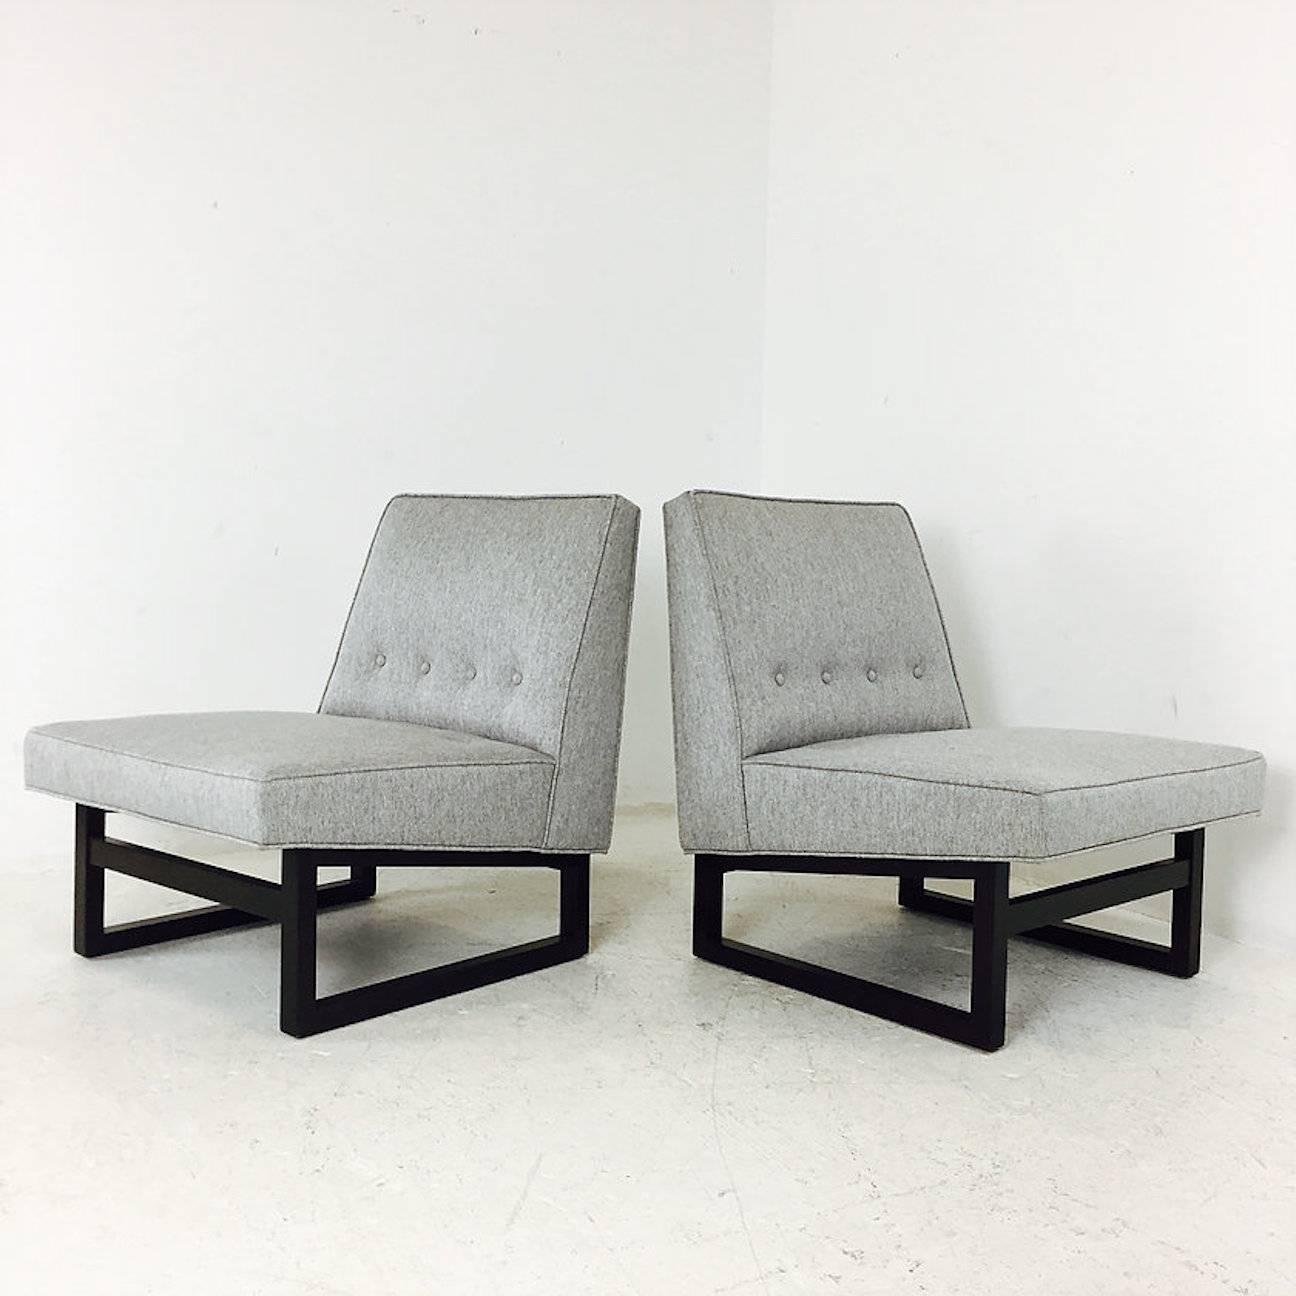 Pair of Dunbar slipper chairs by Ed Wormley. Recently refinished and upholstered. Perfect for a New York apartment.

Dimensions: 25